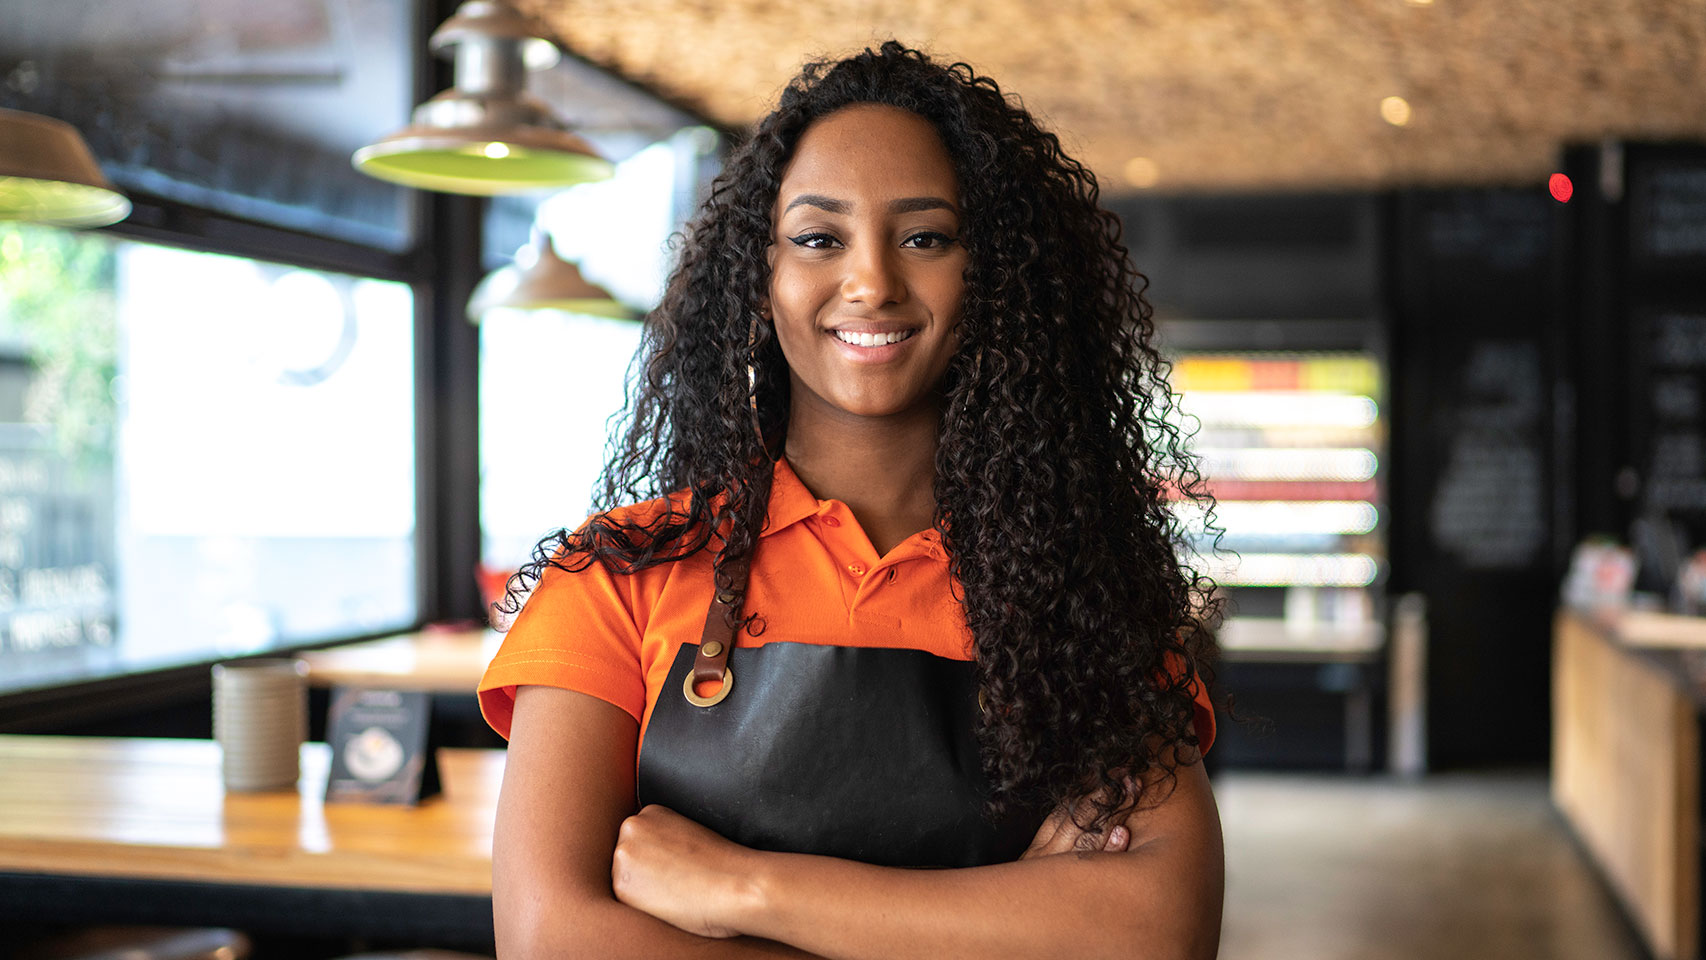 Young woman in a coffee shop smiling for the camera with her arms folded